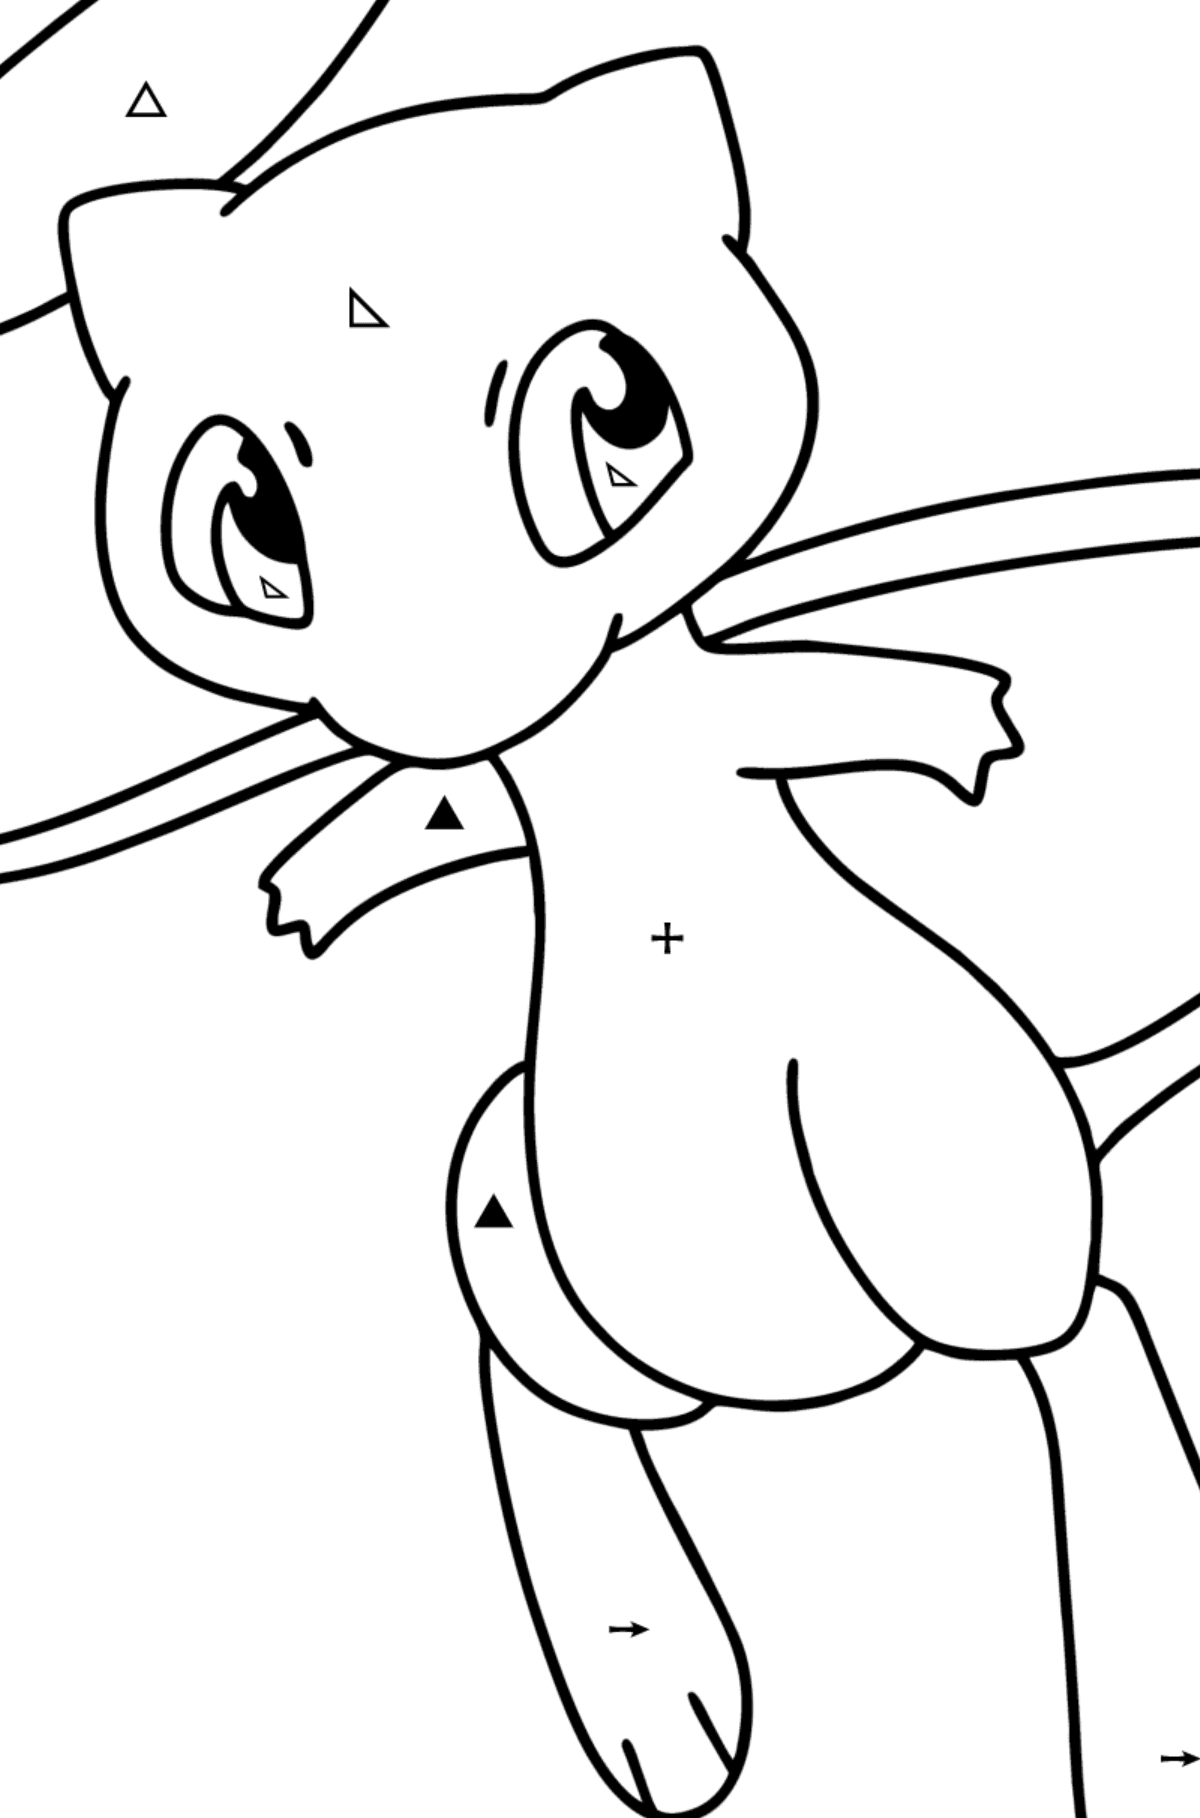 Coloring page Pokemon Go Mew - Coloring by Symbols and Geometric Shapes for Kids